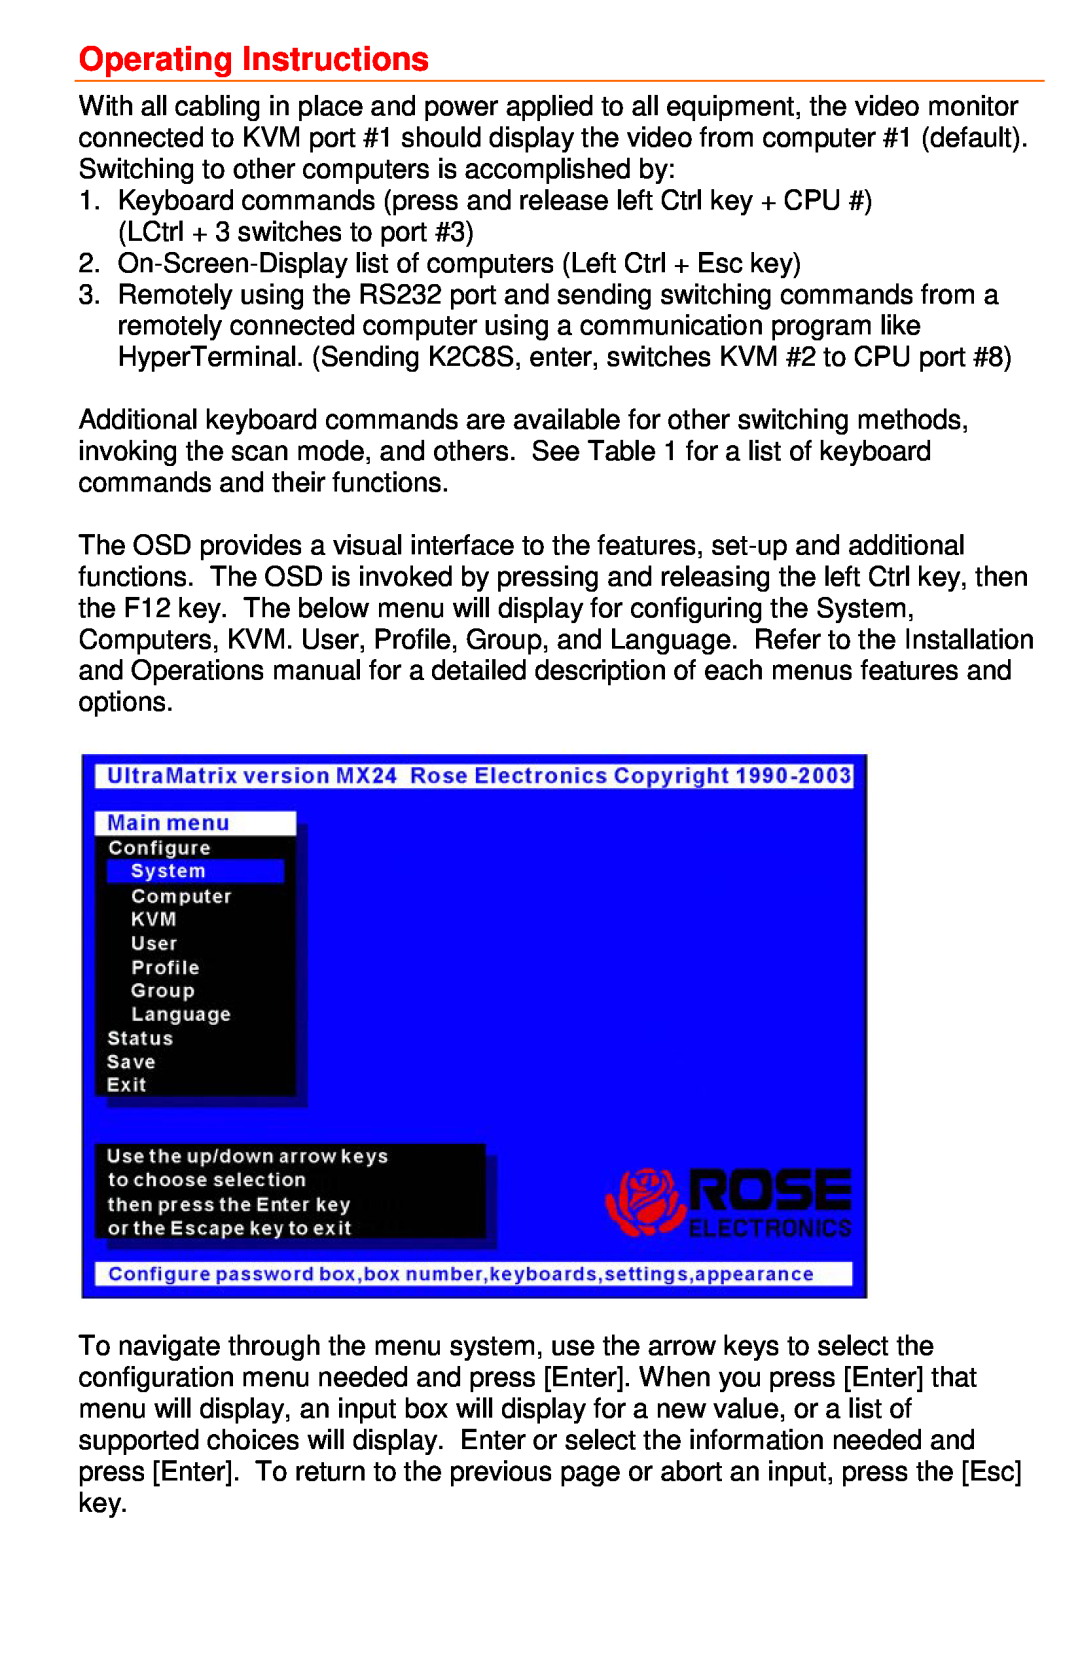 Rose electronic 4XE manual Operating Instructions 